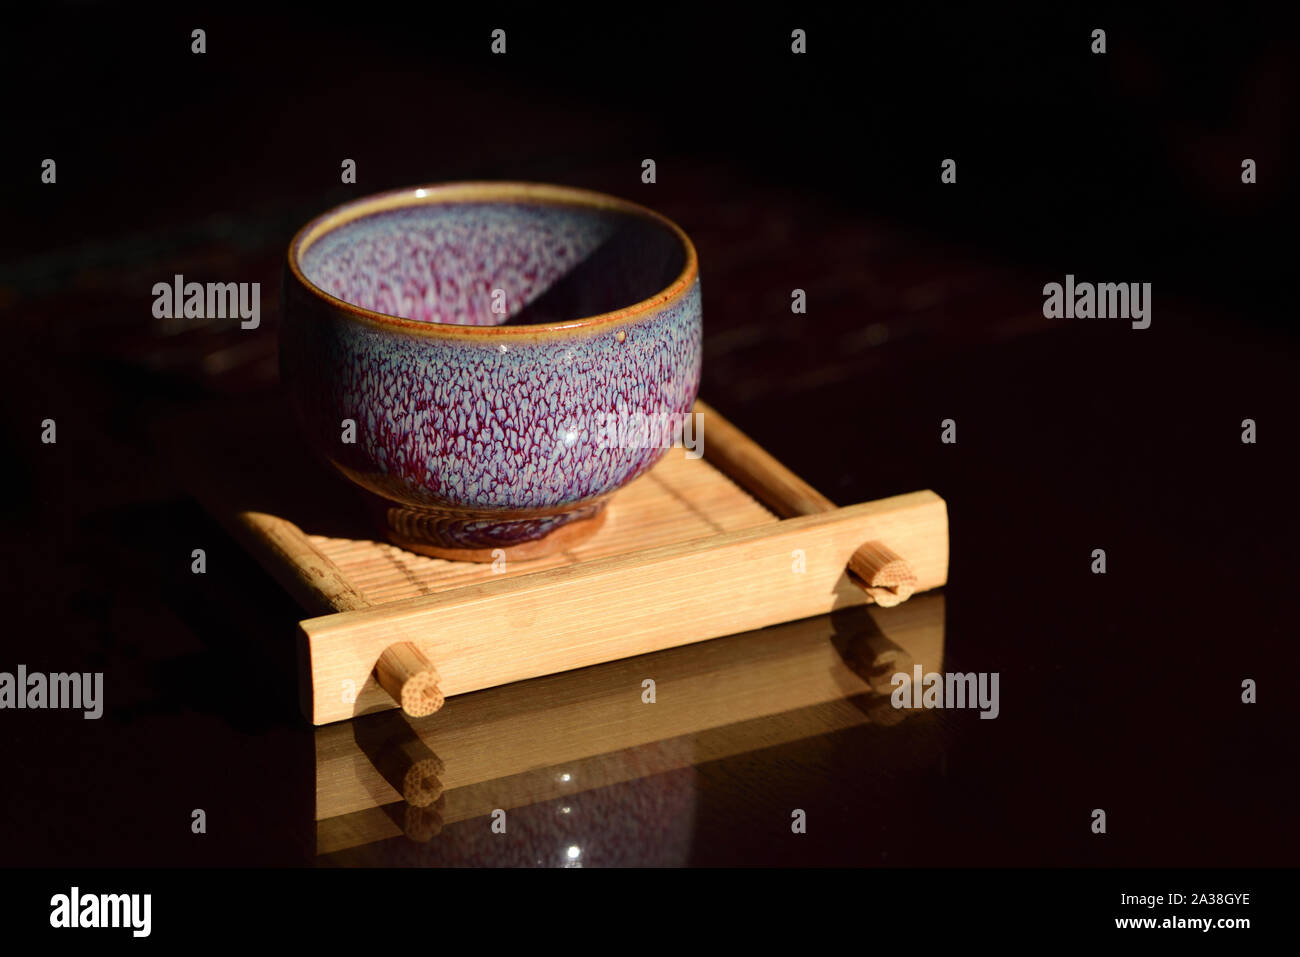 Close-up of a ceramic empty ceramic teacup on a small bamboo board against a dark background at a Chinese tea ceremony Stock Photo